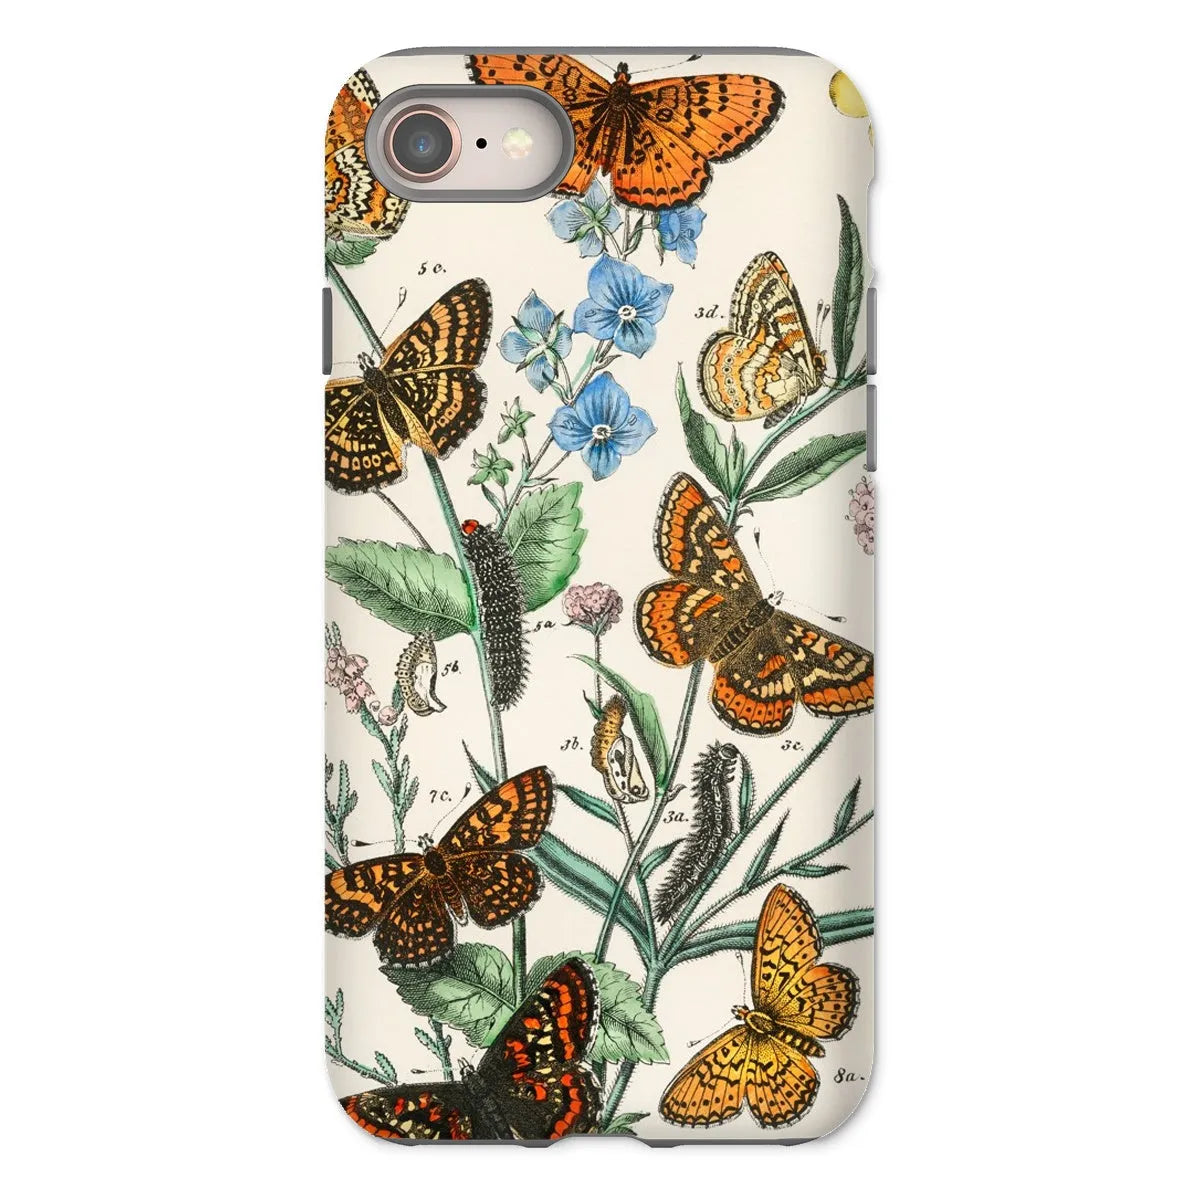 This Butterfly Aesthetic Art Phone Case - William Forsell Kirby - Iphone 8 / Matte - Mobile Phone Cases - Aesthetic Art